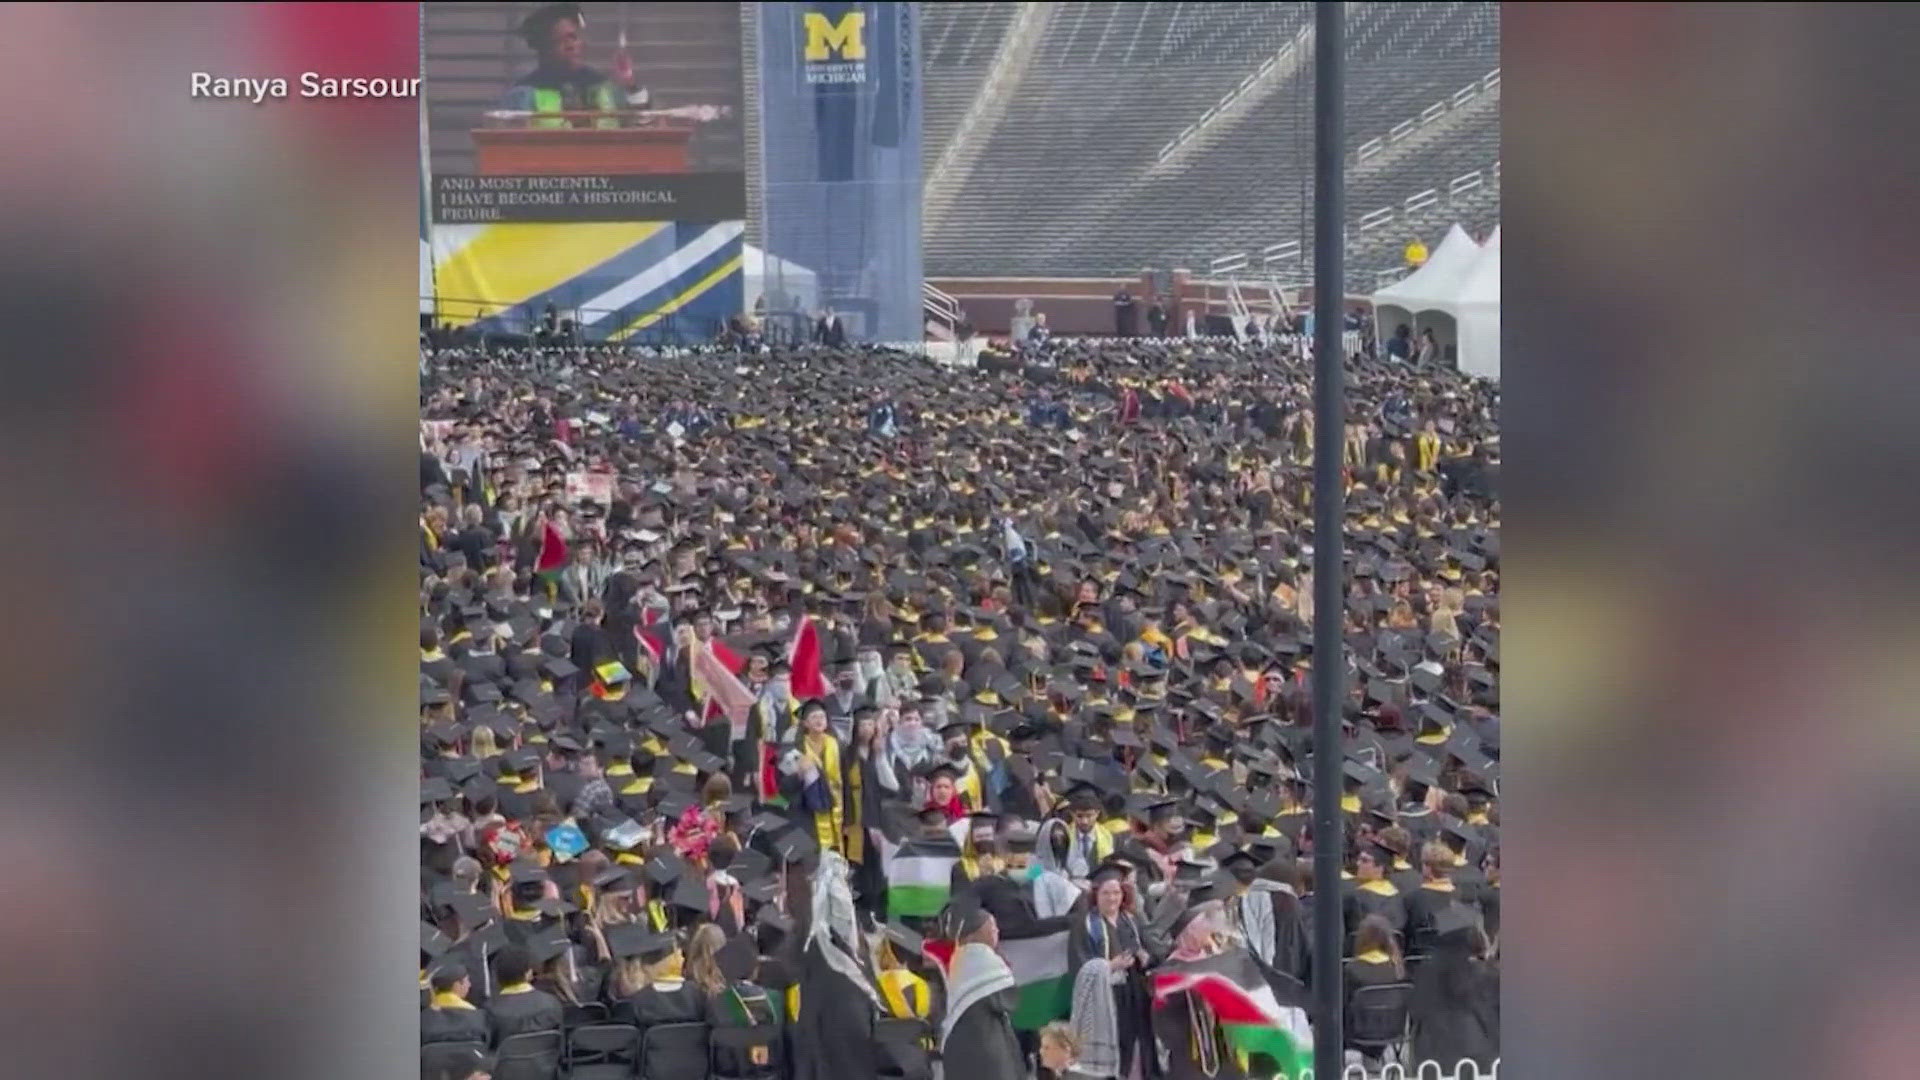 Over the weekend, demonstrators interrupted a graduation ceremony at the University of Michigan.